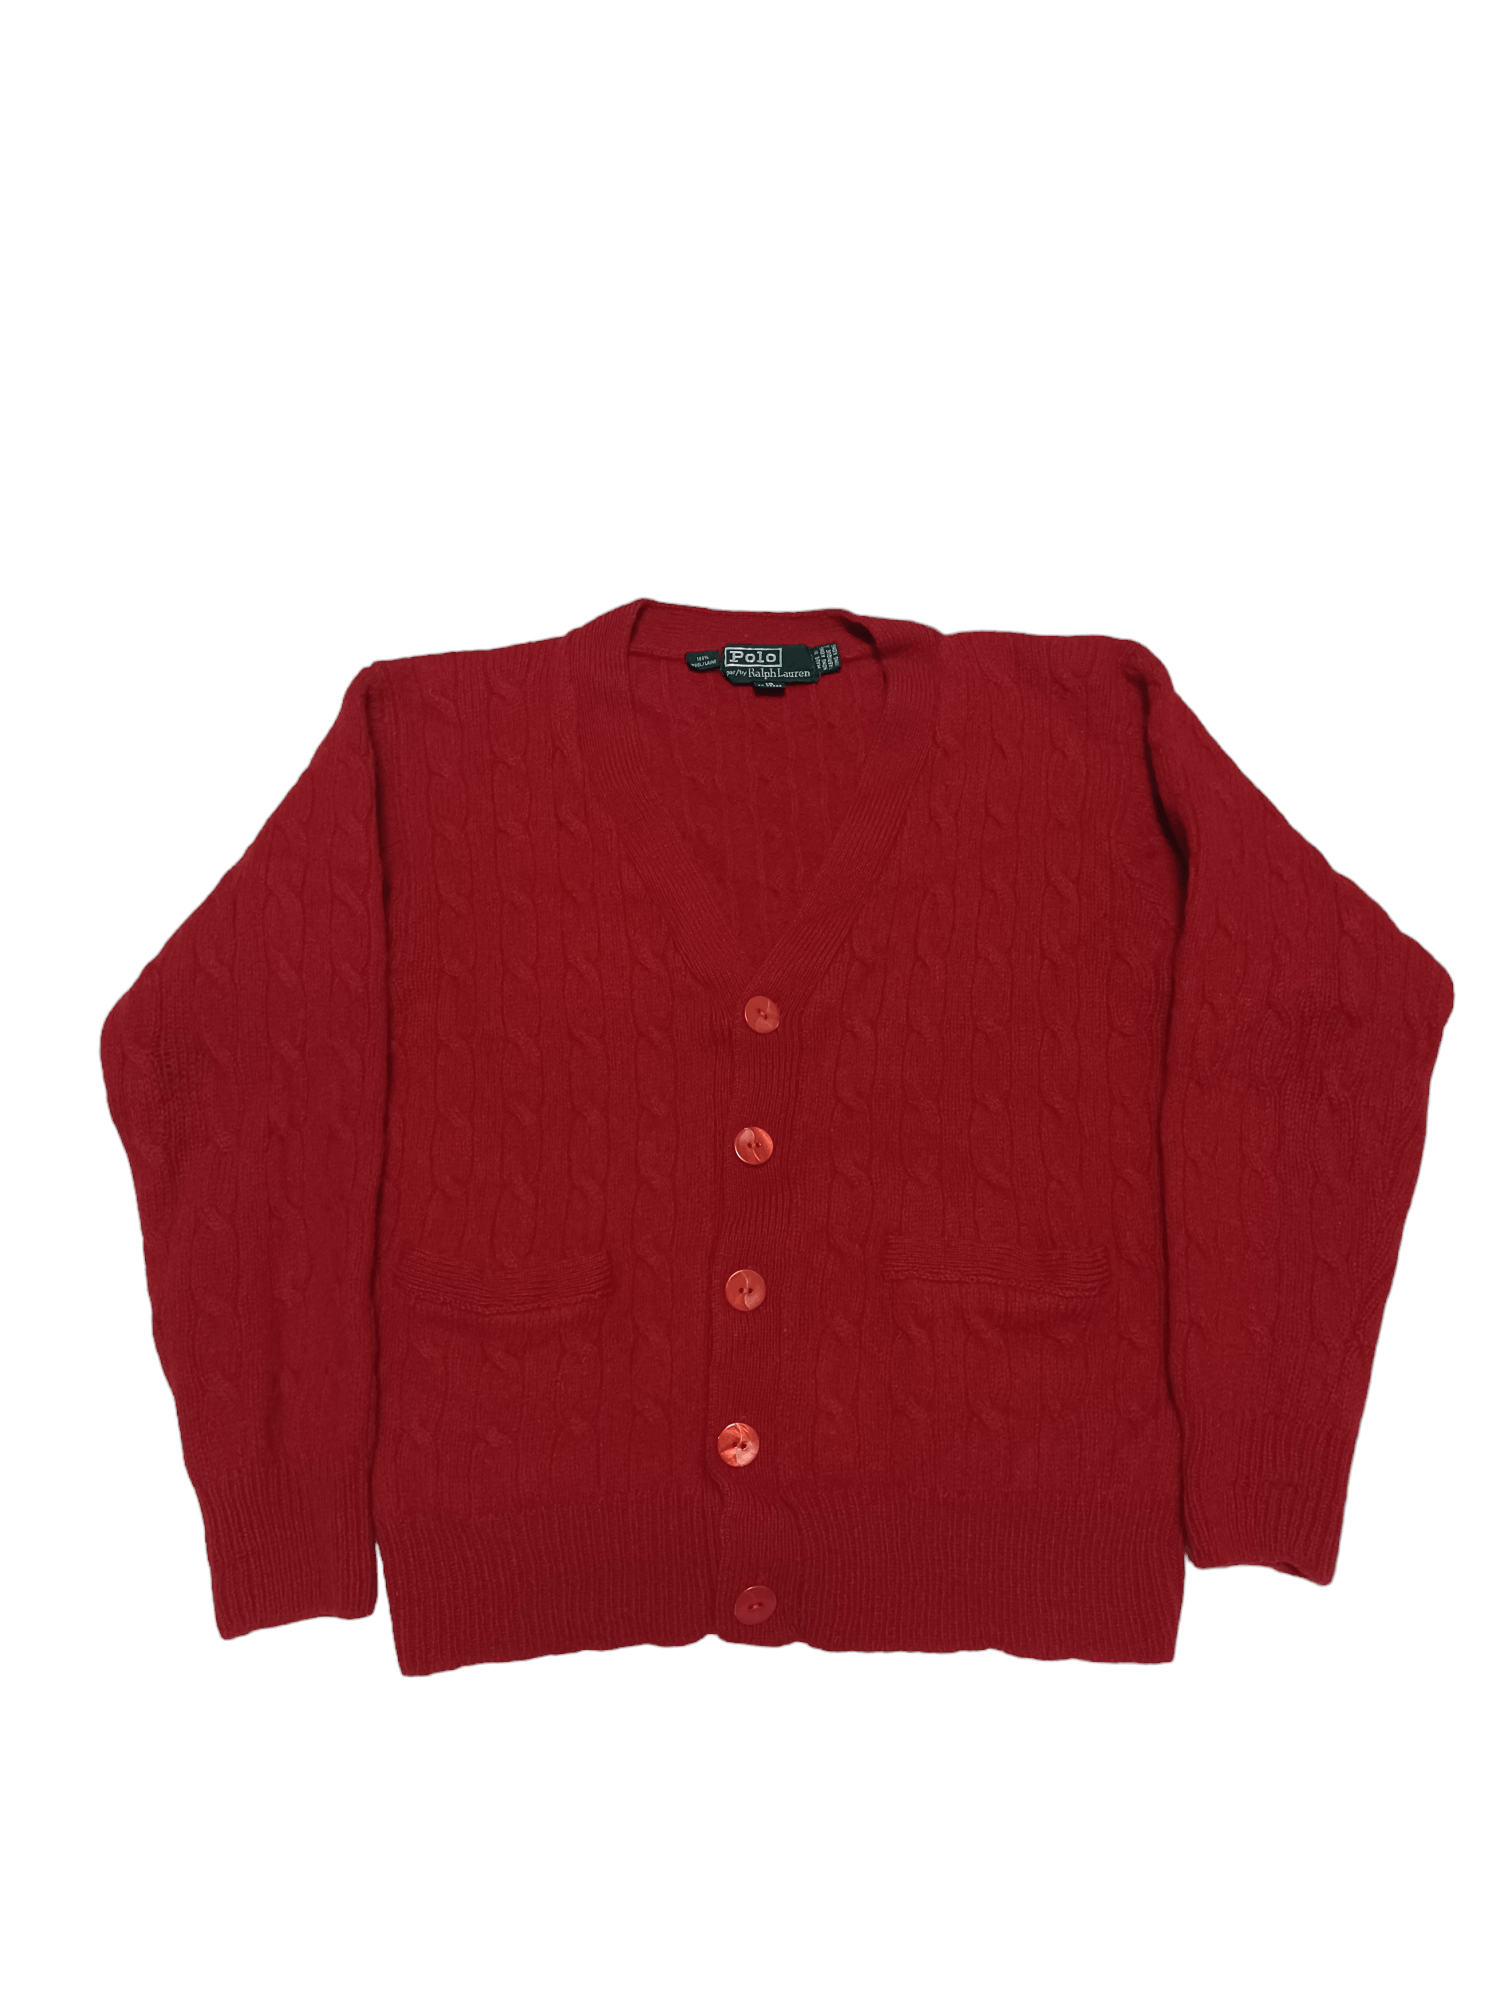 Pre-owned Cardigan X Polo Ralph Lauren Polo Ralph Laurent 100% Wool Vintage 90's Cardigan In Red